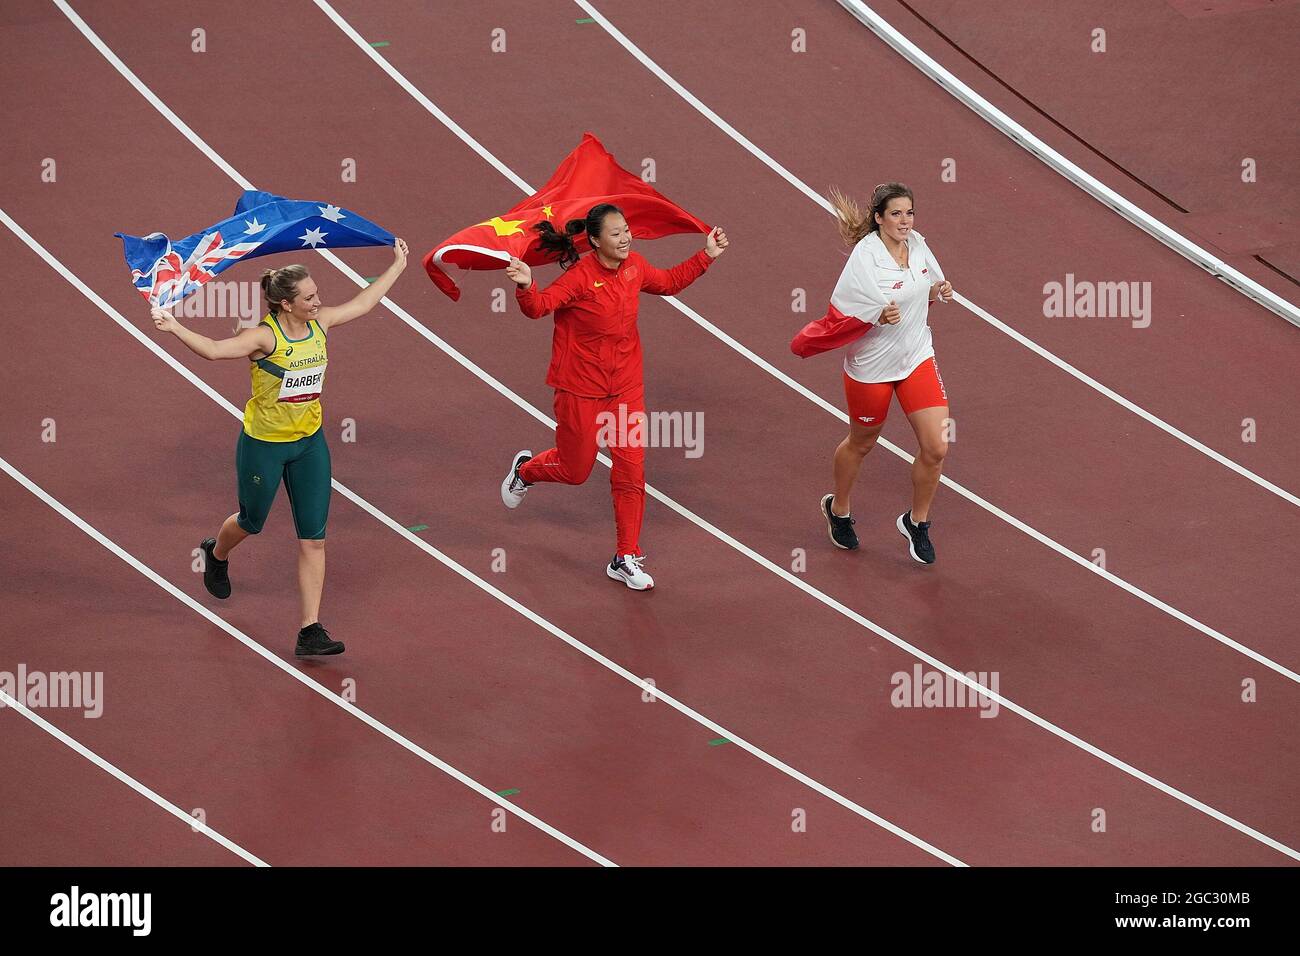 Tokyo, Japan. 6th Aug, 2021. (From L to R) Kelsey-Lee Barber of Australia, Liu Shiying of China and Maria Andrejczyk of Poland celebrate after the women's javelin throw final at Tokyo 2020 Olympic Games, in Tokyo, Japan, Aug. 6, 2021. Credit: Lui Siu Wai/Xinhua/Alamy Live News Stock Photo